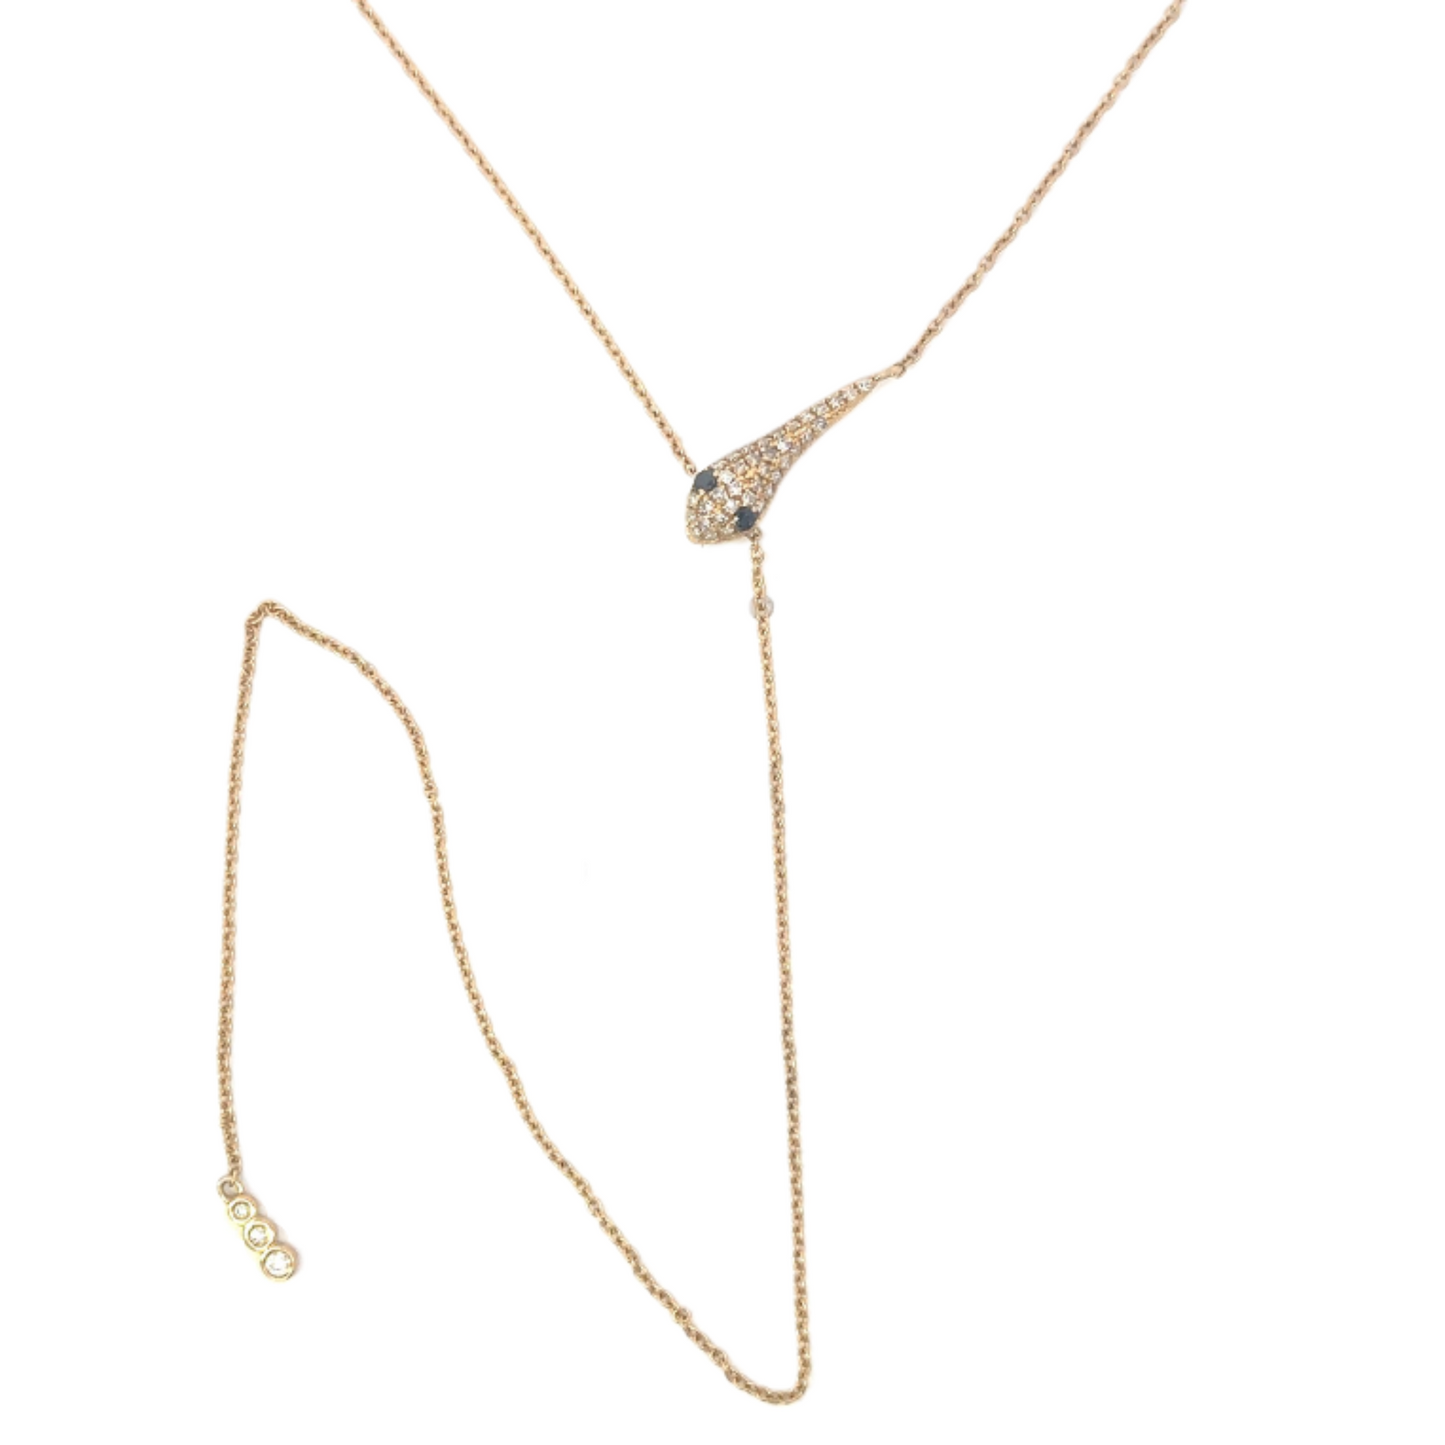 Pave Diamond Snake Lariat Necklace with Sapphire Eyes